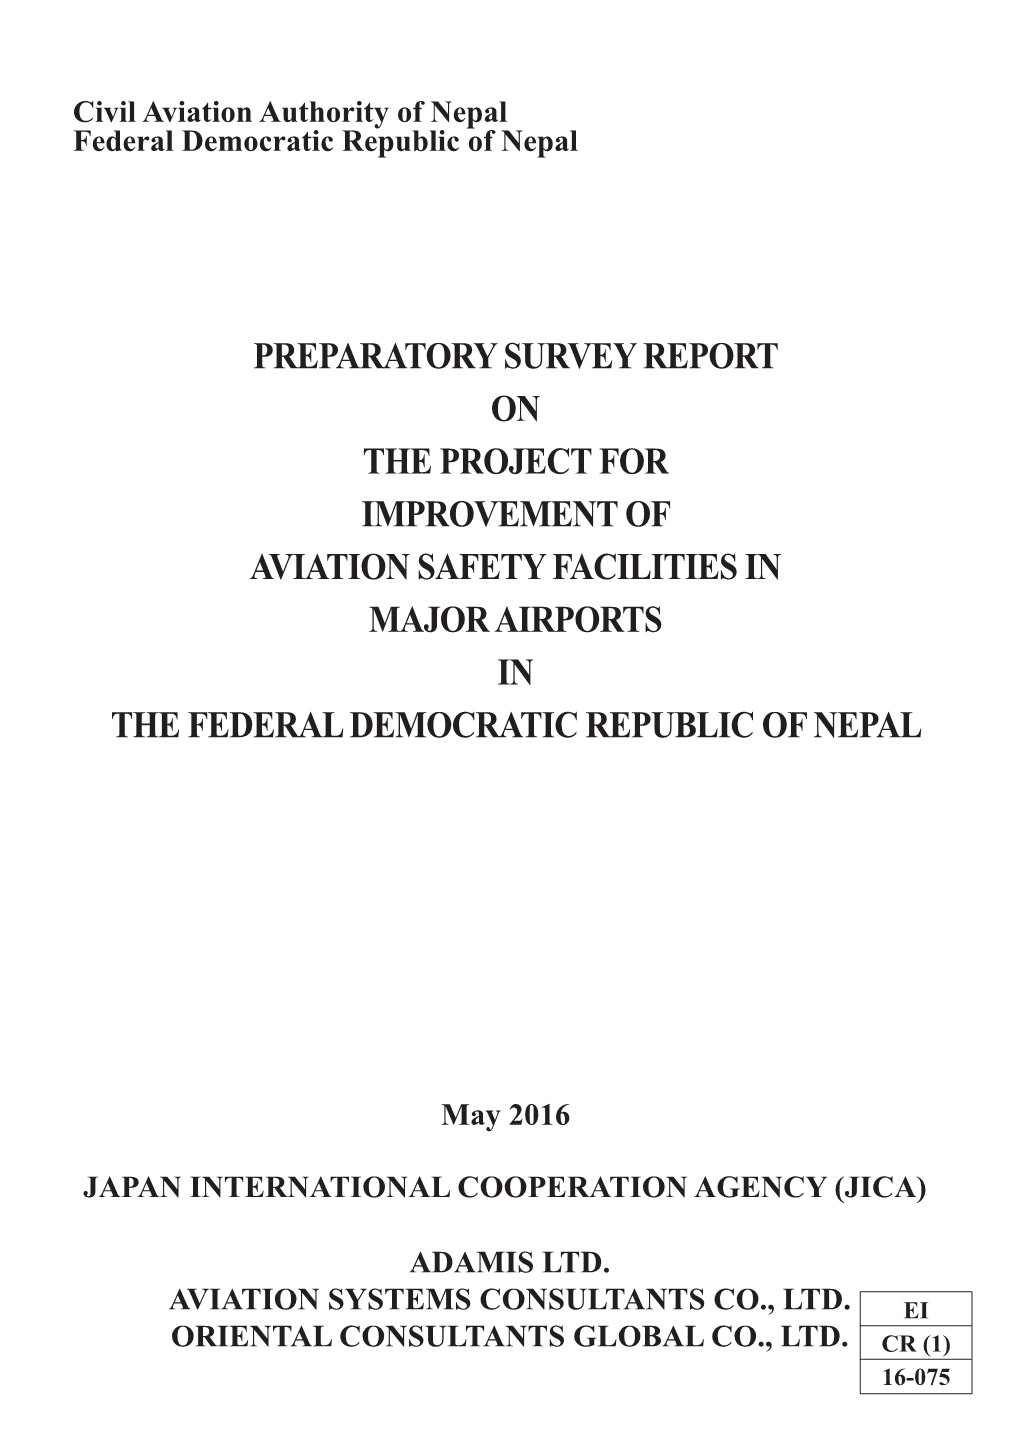 Preparatory Survey Report on the Project for Improvement of Aviation Safety Facilities in Major Airports in the Federal Democratic Republic of Nepal